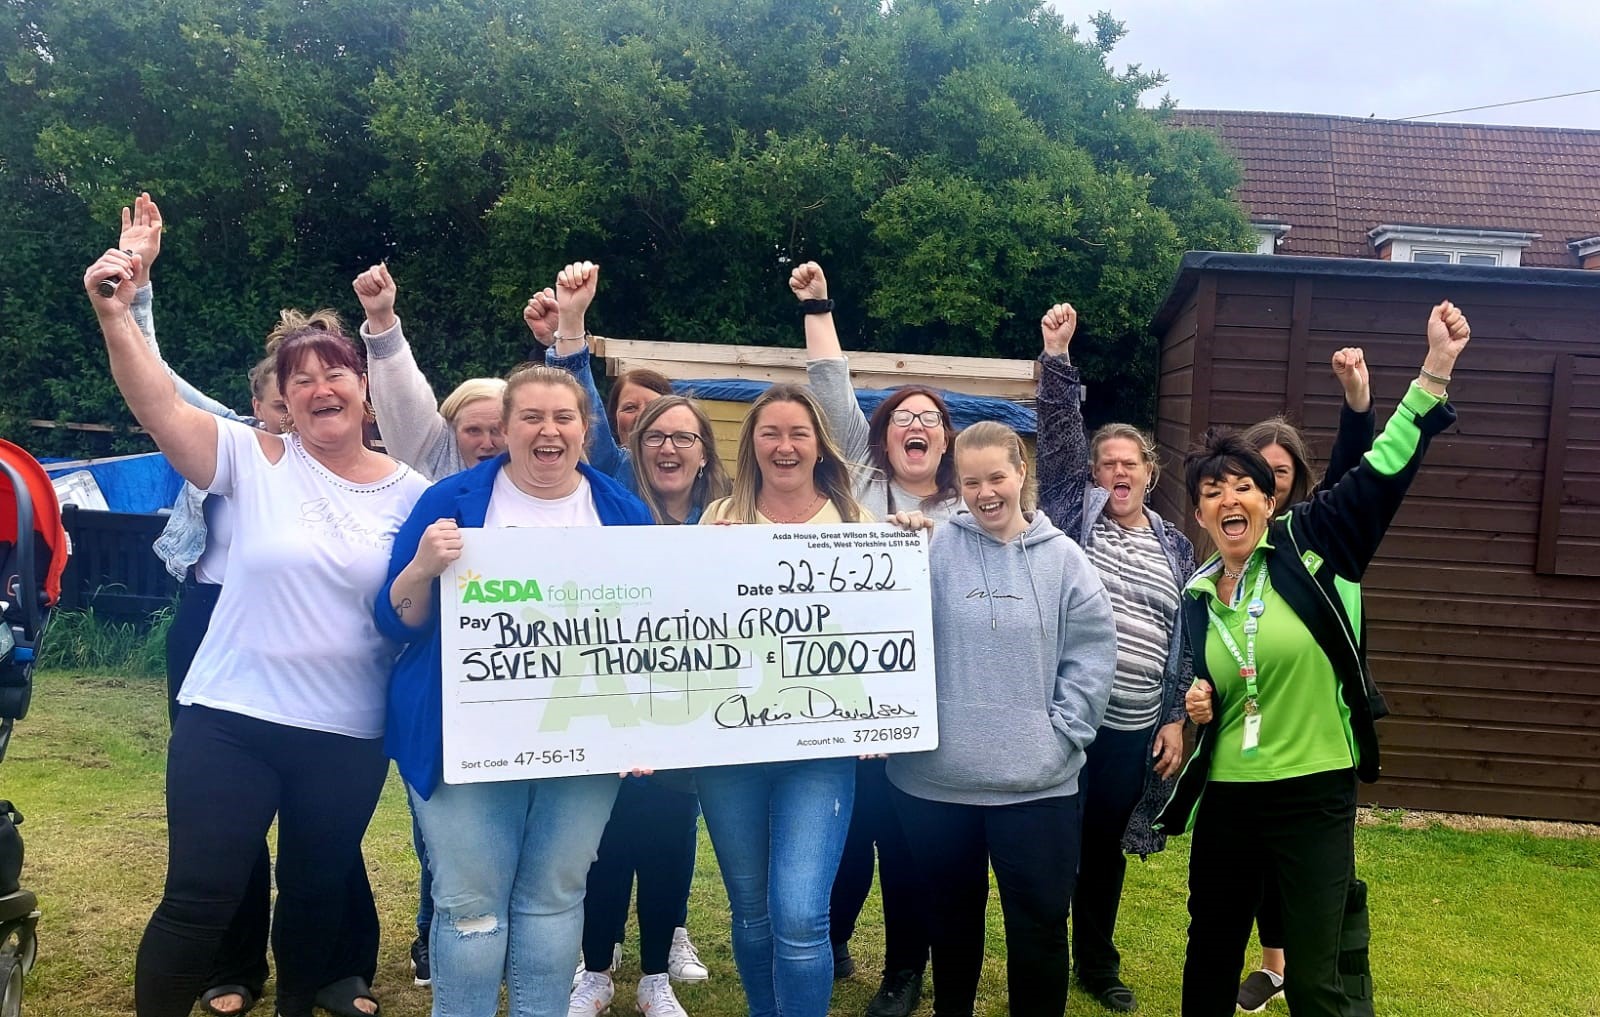 Asda's cash boost to breathe new life into Burnhill Action Group space